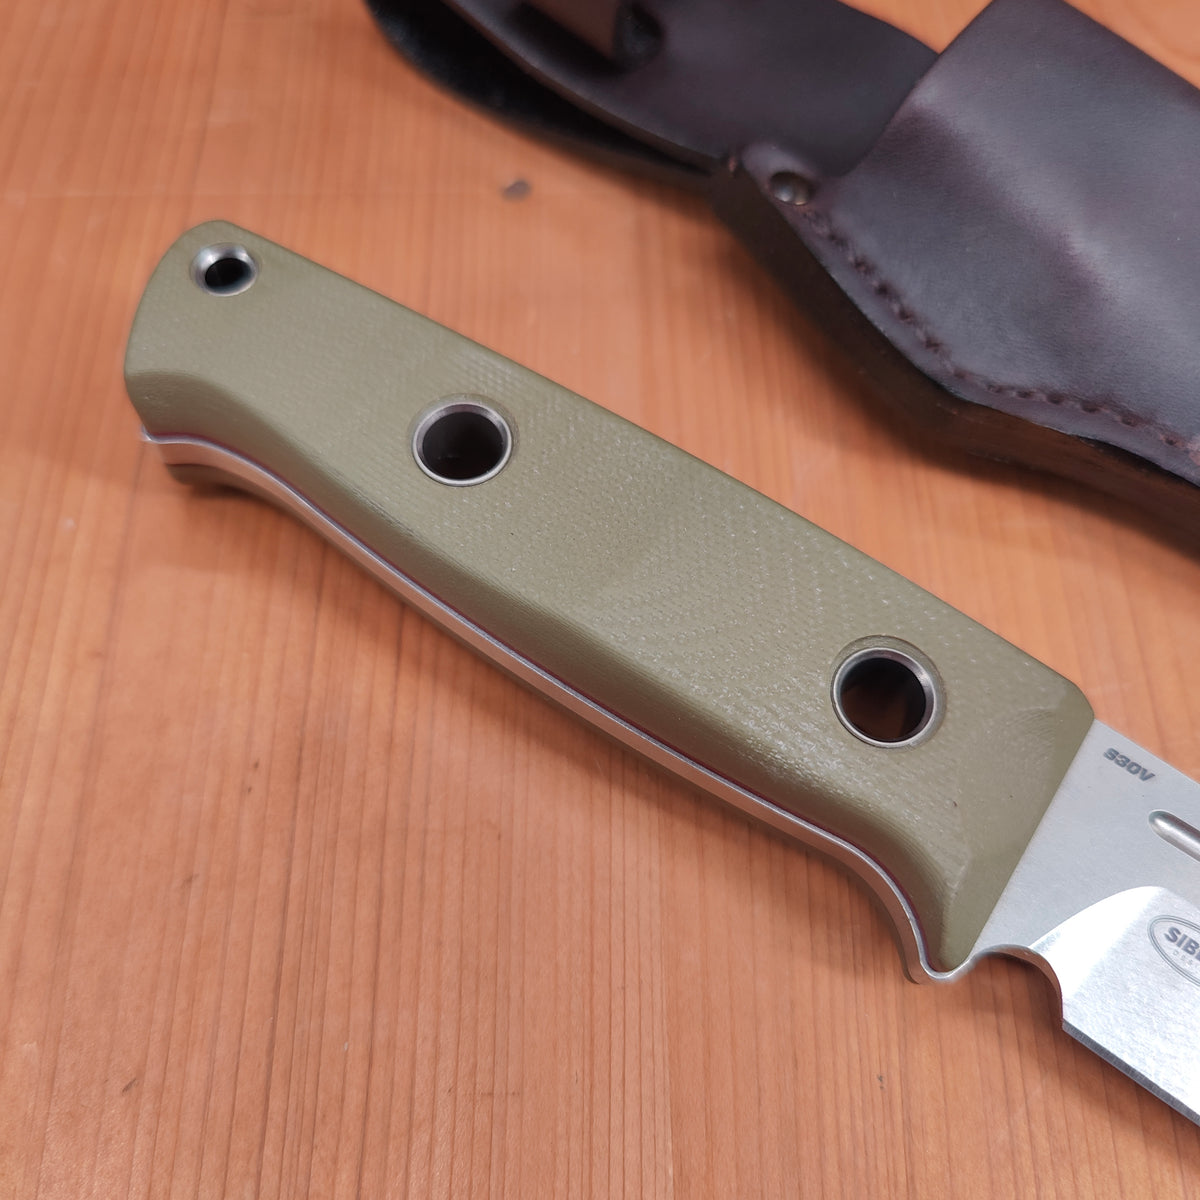 Benchmade 165-1 Mini Bushcrafter Drop Point OD Green G10 with Leather Sheath